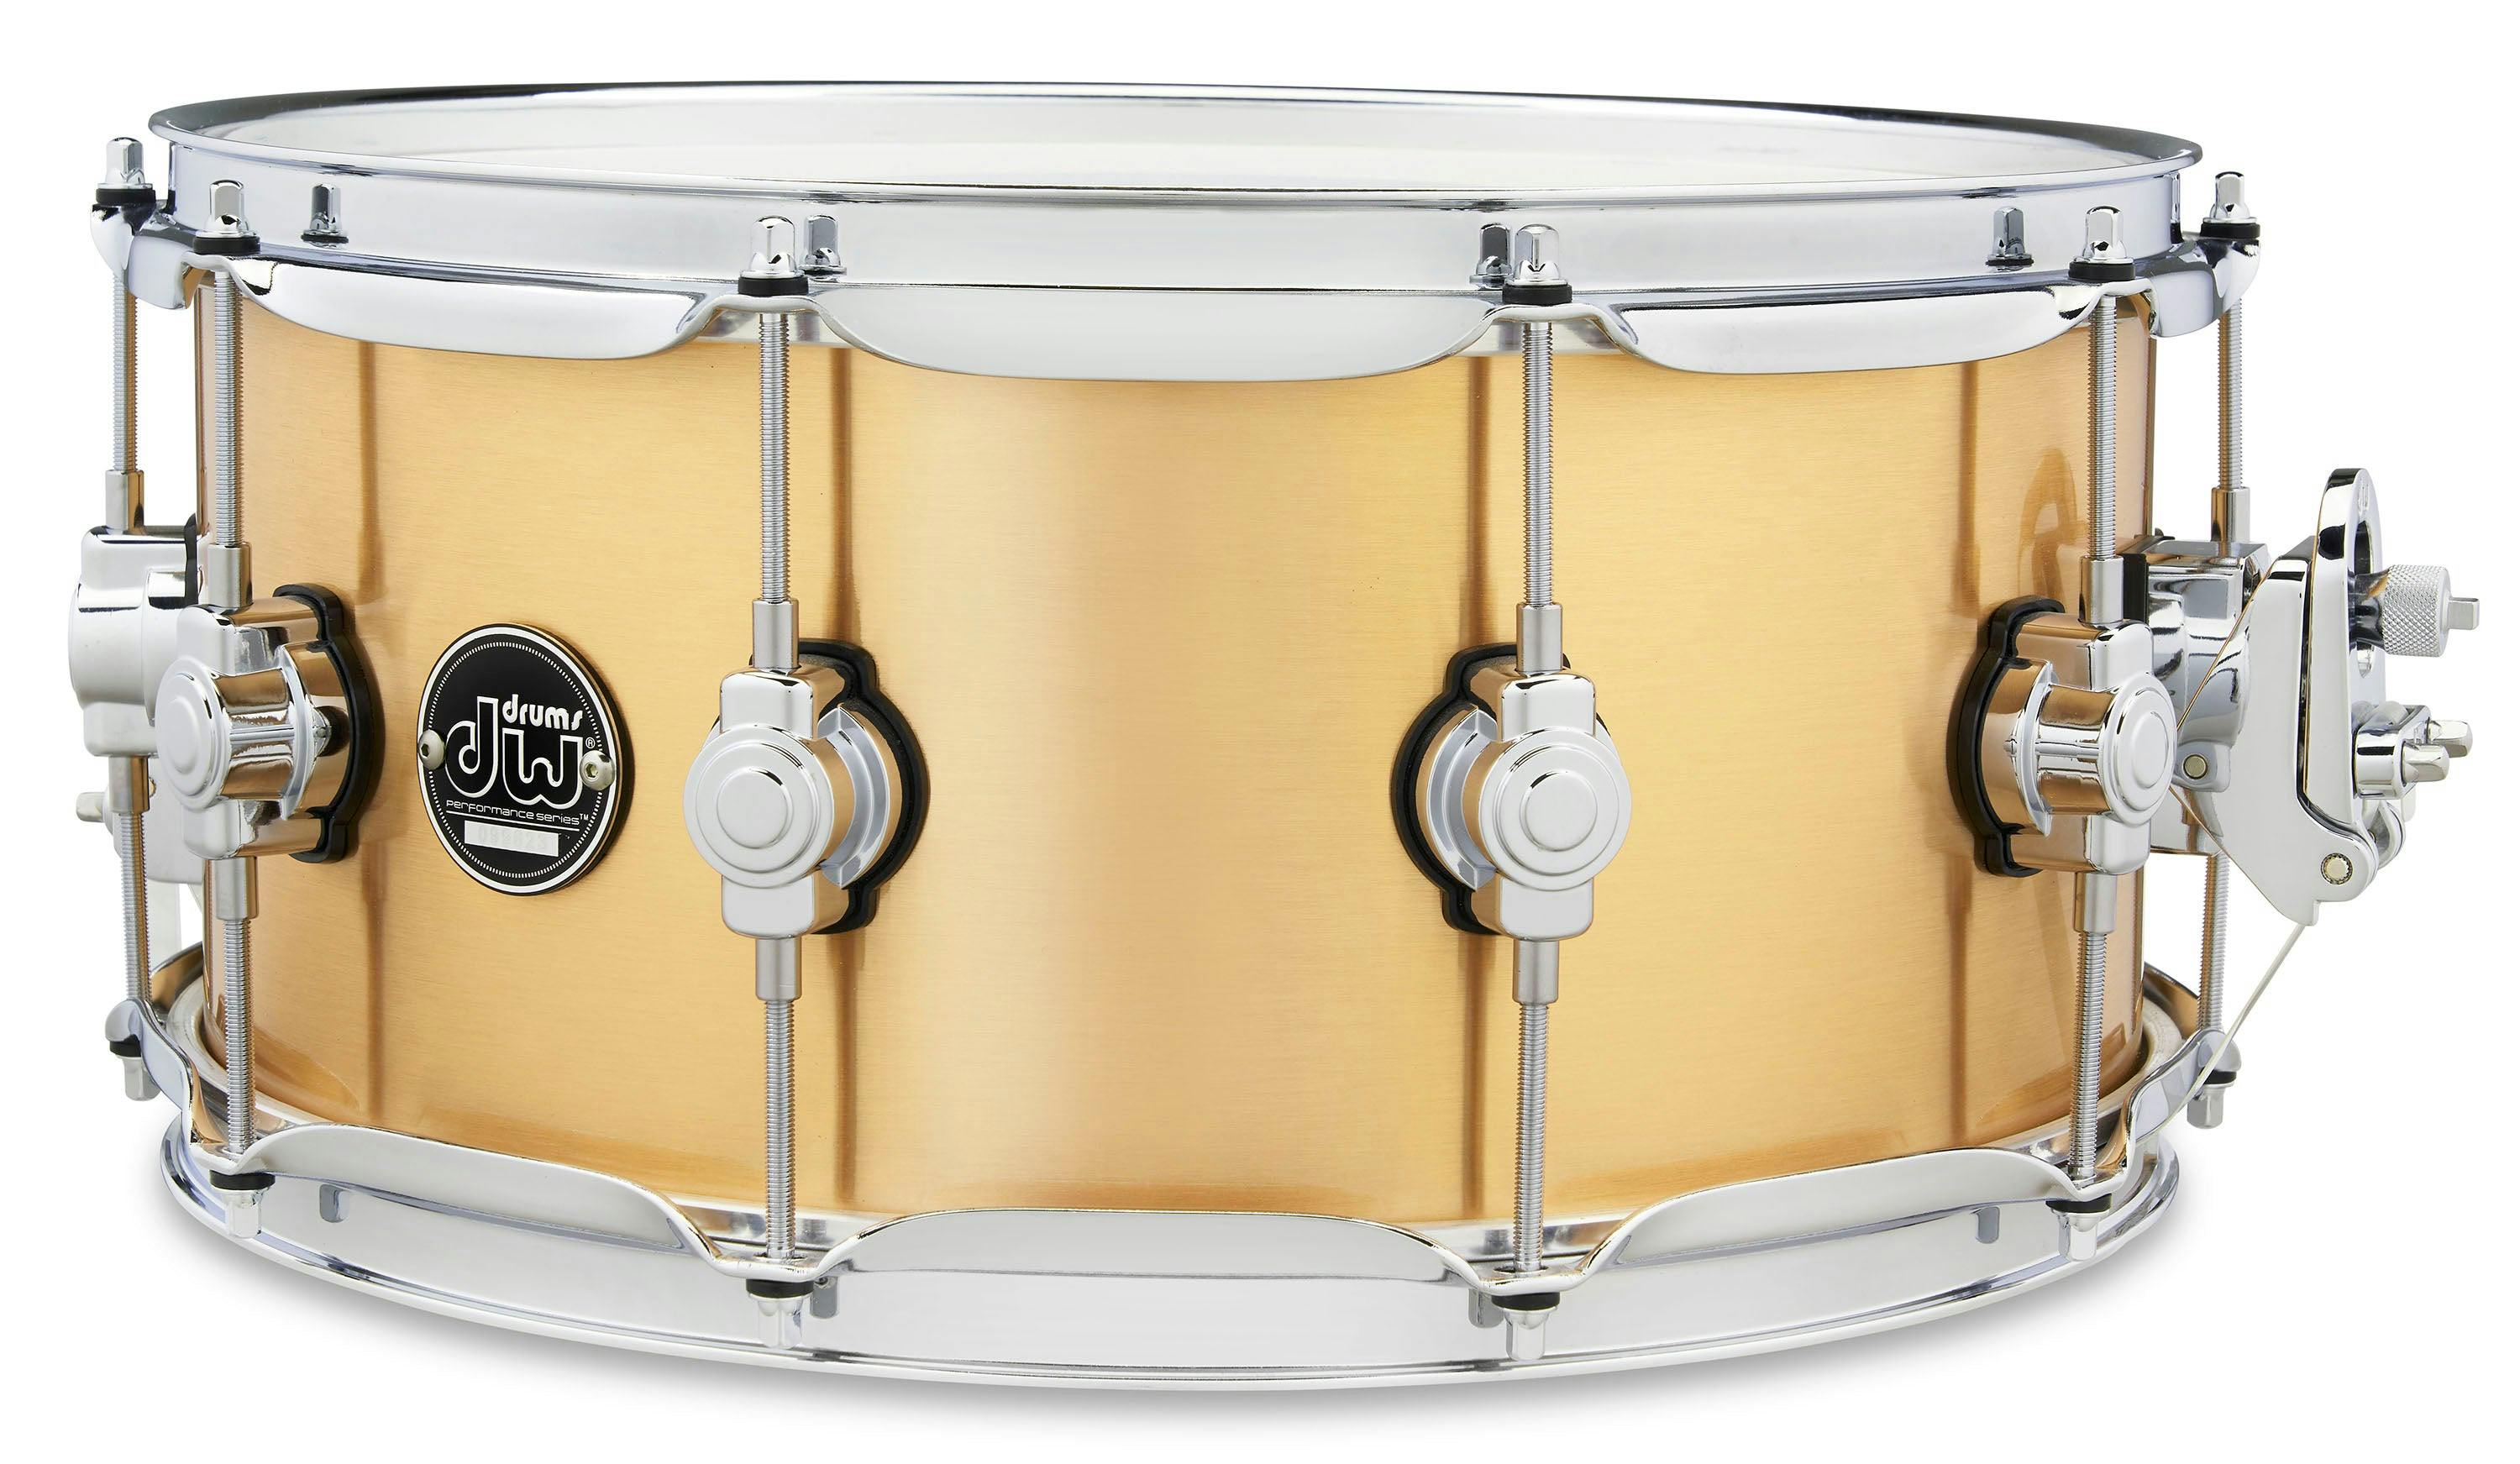 PartId DRPM6514SSBP - Performance Brass Snare Drum 6 5x14 Product Image